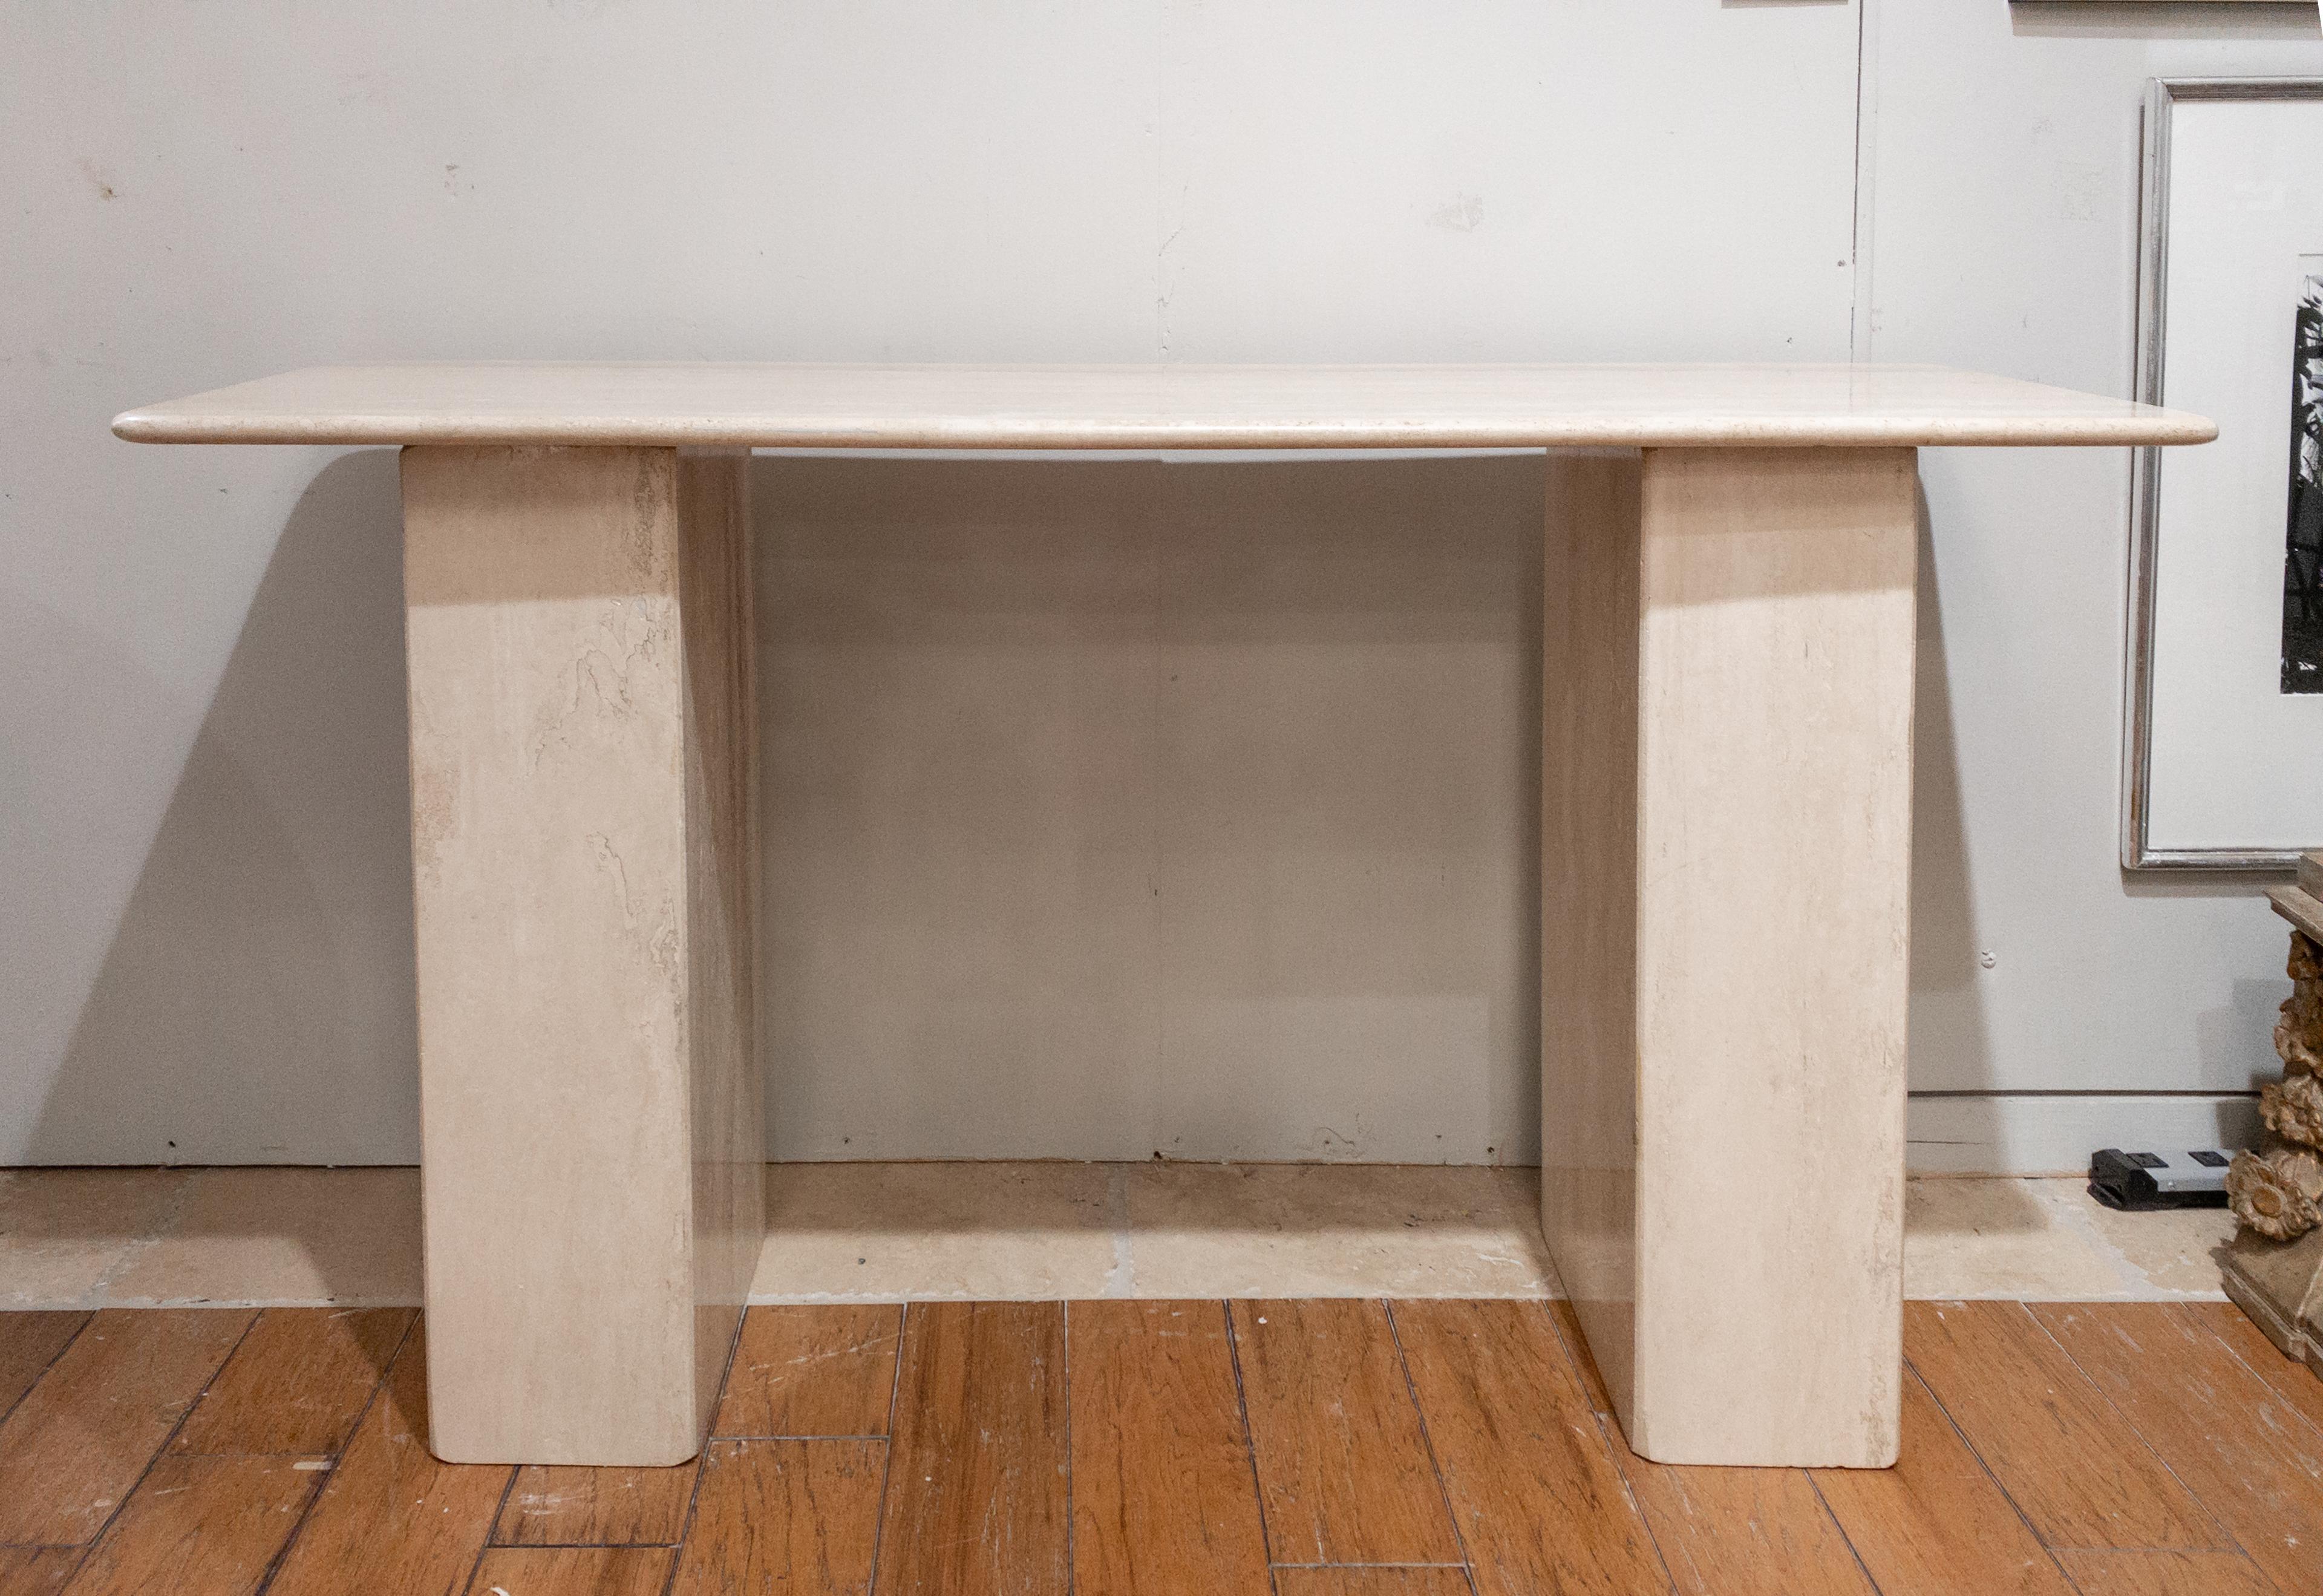 Limestone Console Table
Made of cut and polished limestone slabs assembled into three separate components.